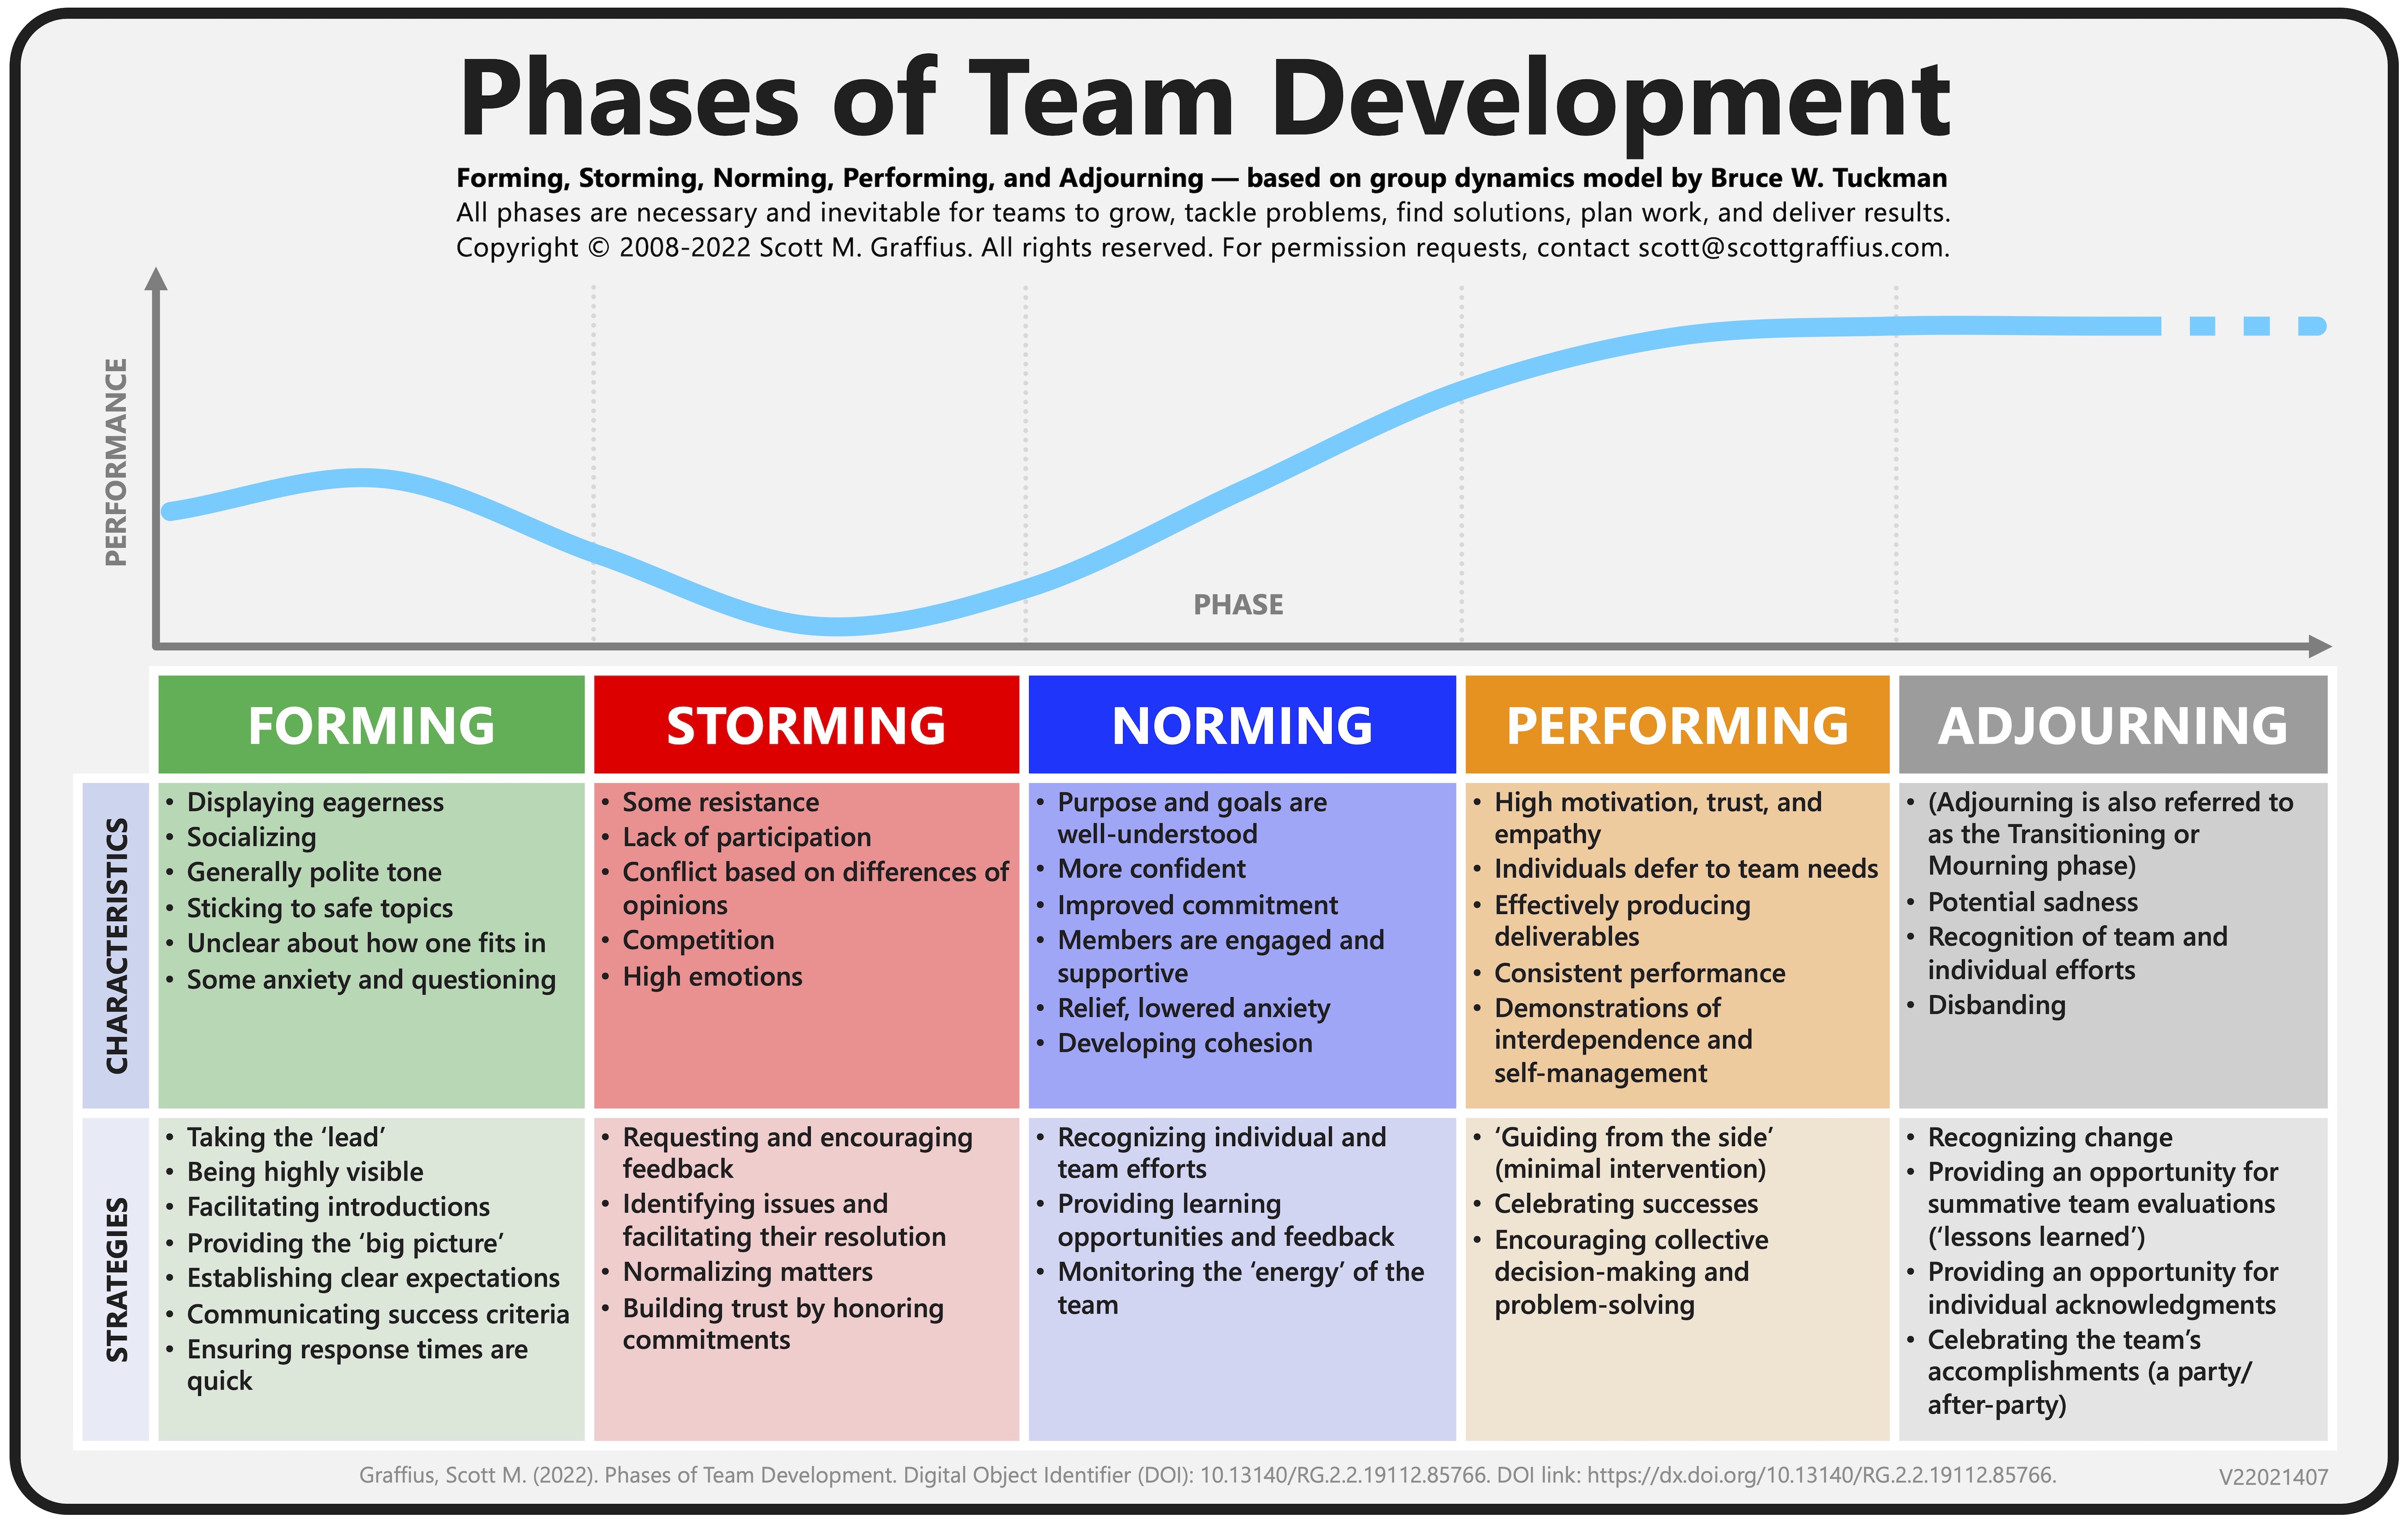 Use Tuckman's Model of Team Dynamics (Forming, Storming, Norming,  Performing, and Adjourning) to Help Your Teams Succeed | Agile Scrum Guide  | Book | Blog